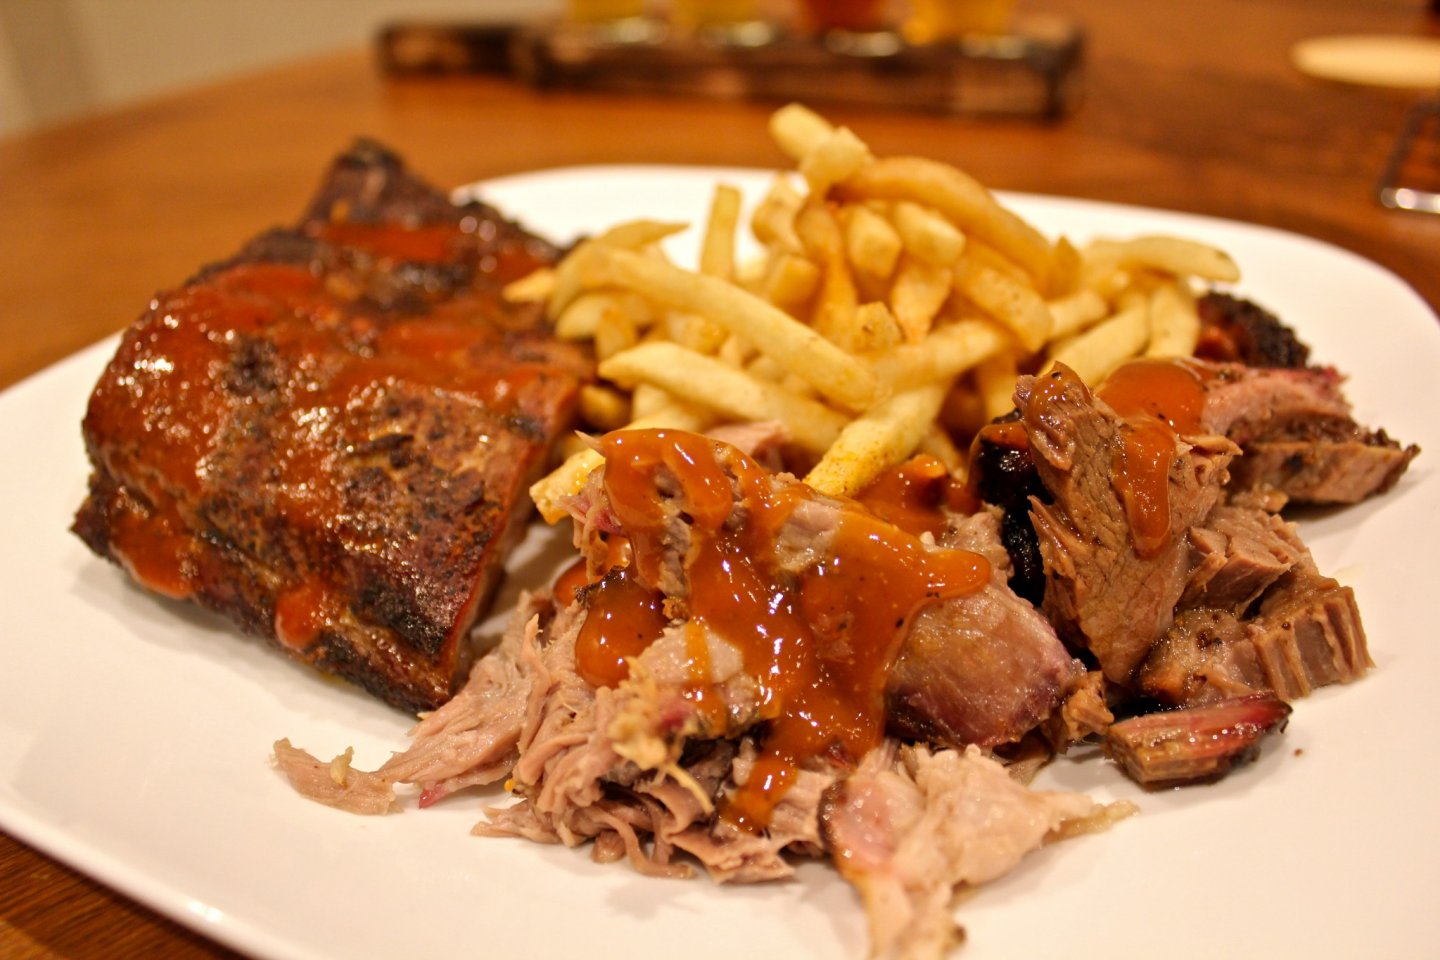 The 3 Meat BBQ Plate Set includes Baby Back Ribs, Beef Brisket, and Pulled Pork. Served with your choice of Seasoned Fries or Creole Potato Salad. 1,500yen